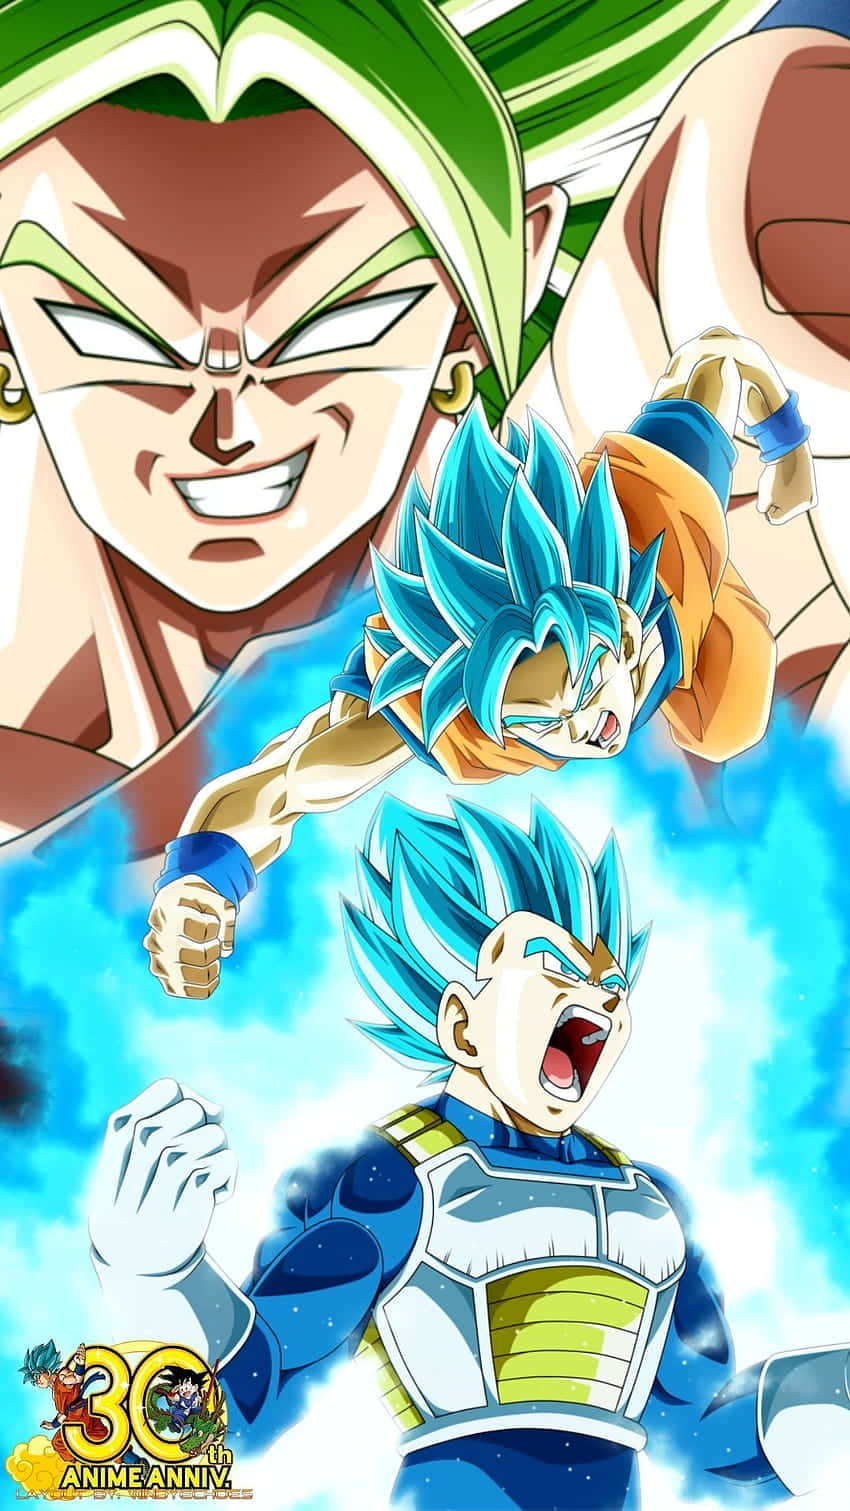 Goku and Vegeta Ready to Battle on iPhone Wallpaper